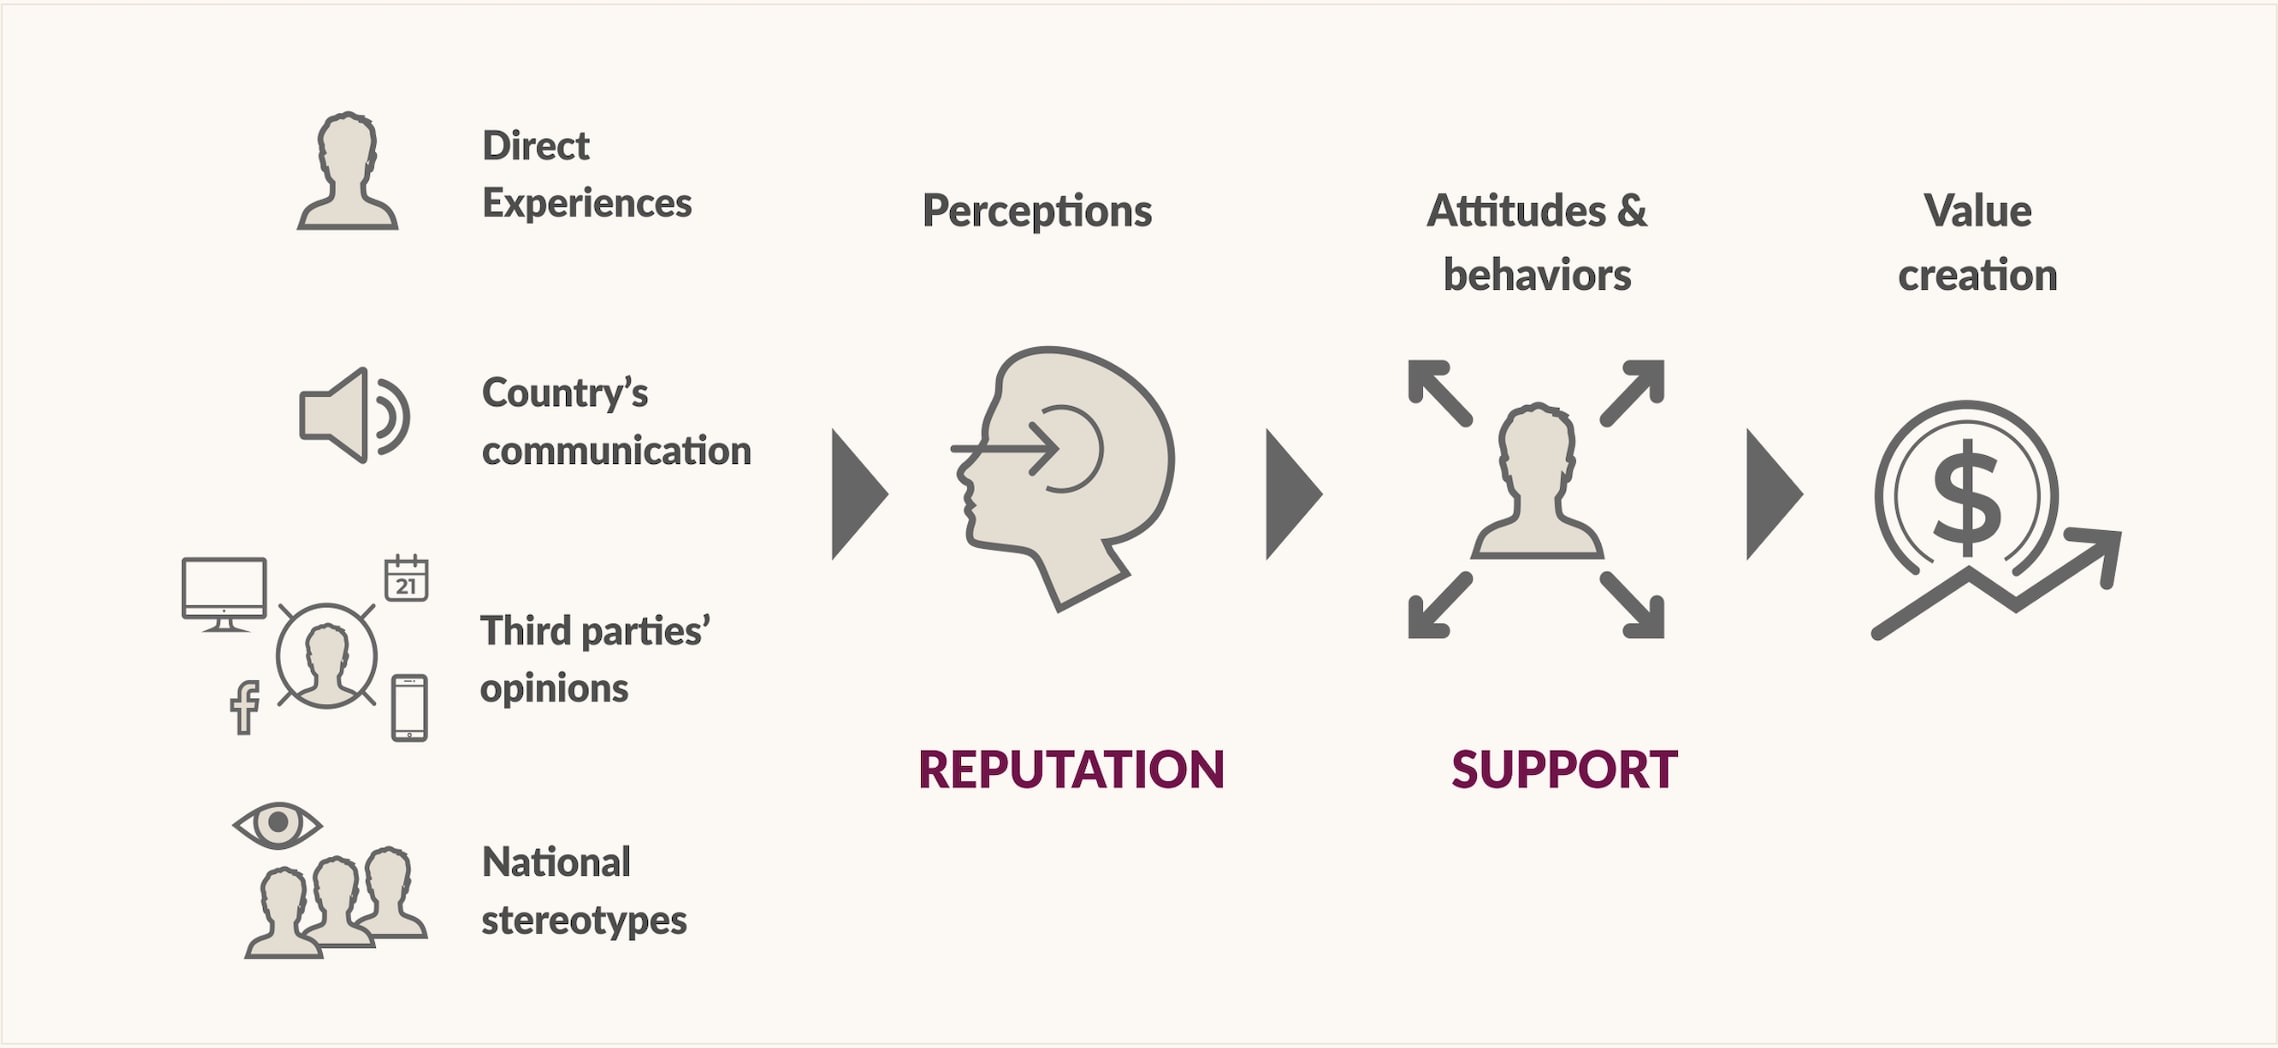 Direct experiences, country's communication, third parties' opinions, and national stereotypes form perceptions that make up your reputation. This leads to attitudes and behaviours, which in turn leads to value creation.